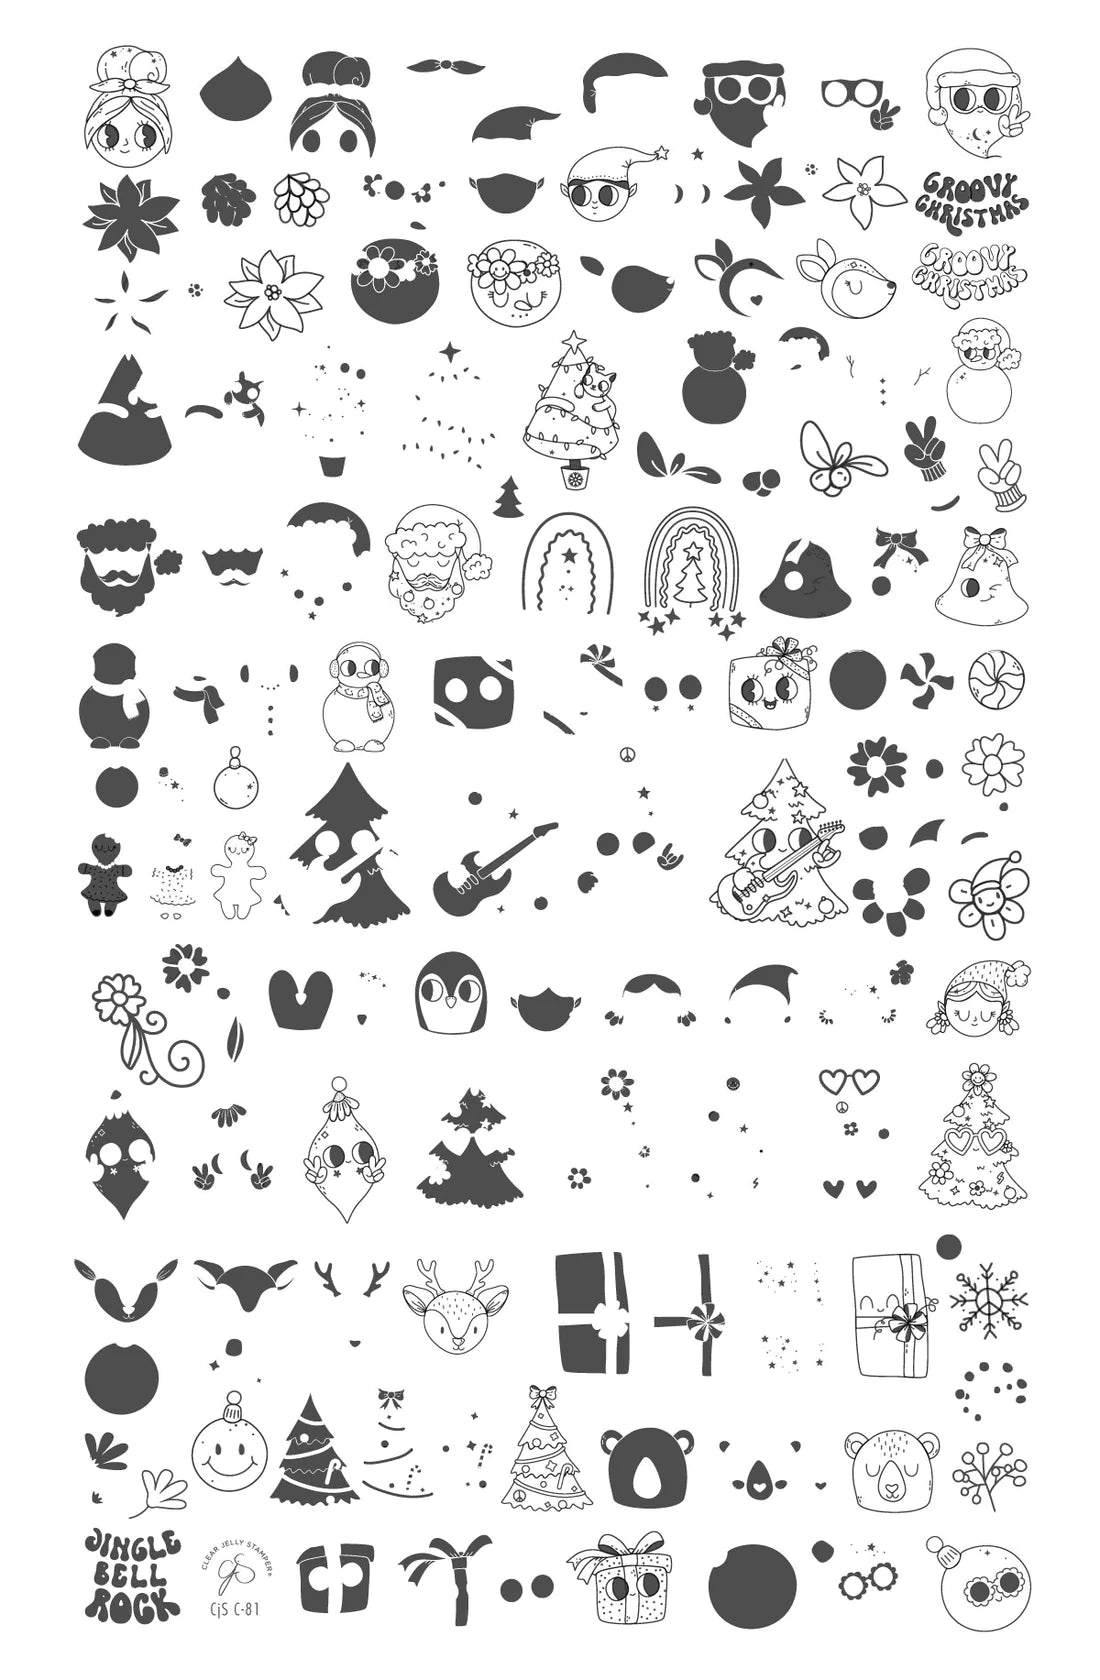 
                  
                    CjSC-081 - Groovy Christmas  |  Clear Jelly Stamping Plate
                  
                